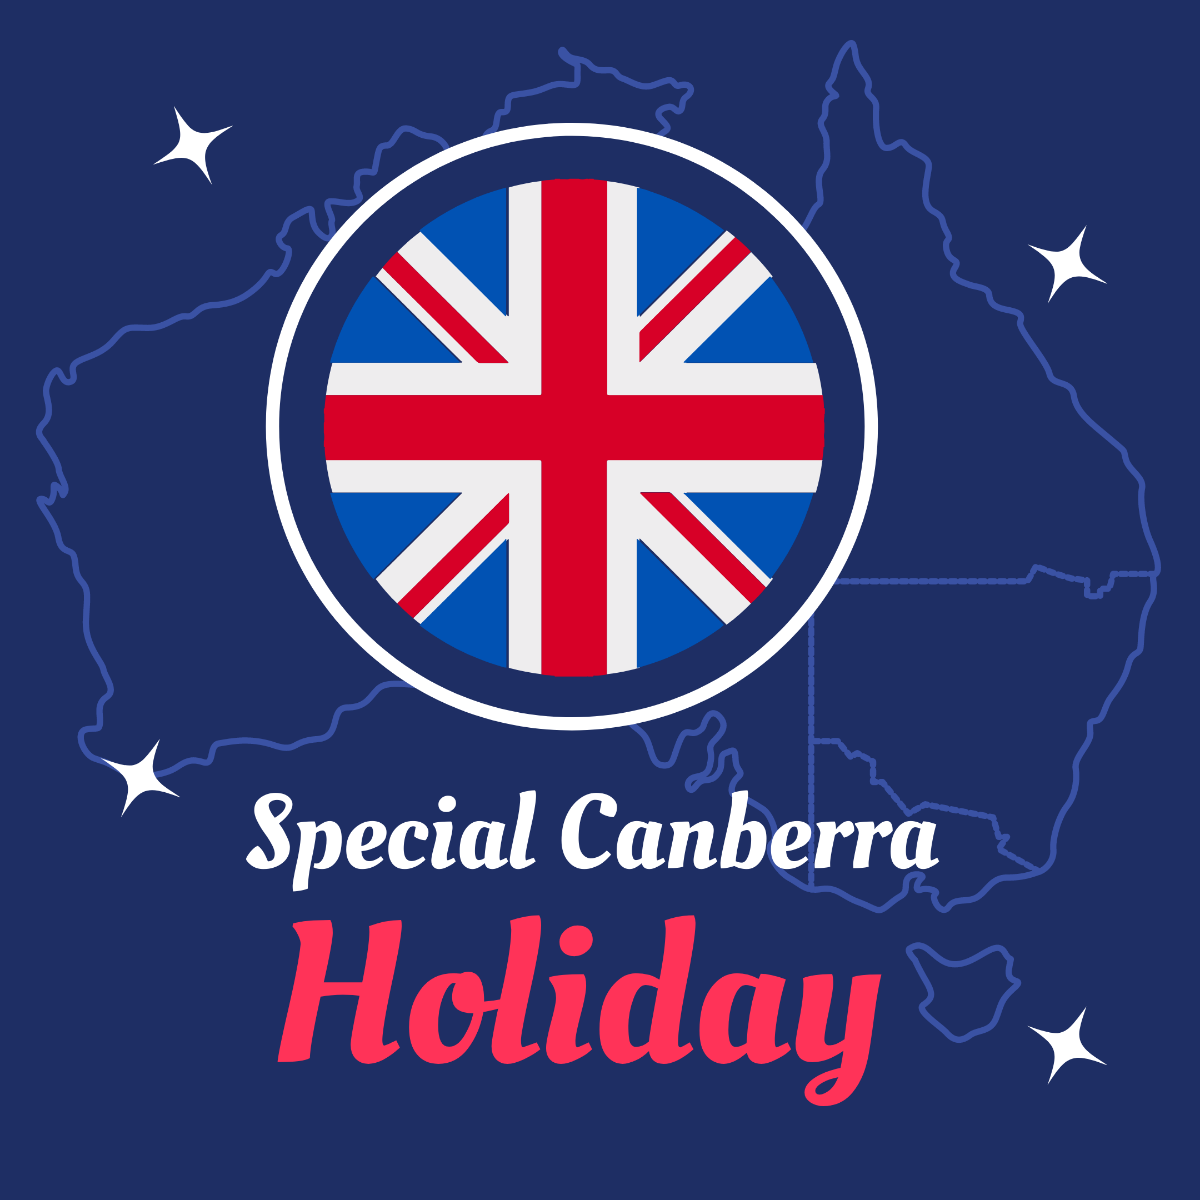 Free Canberra Day Celebration Vector Template